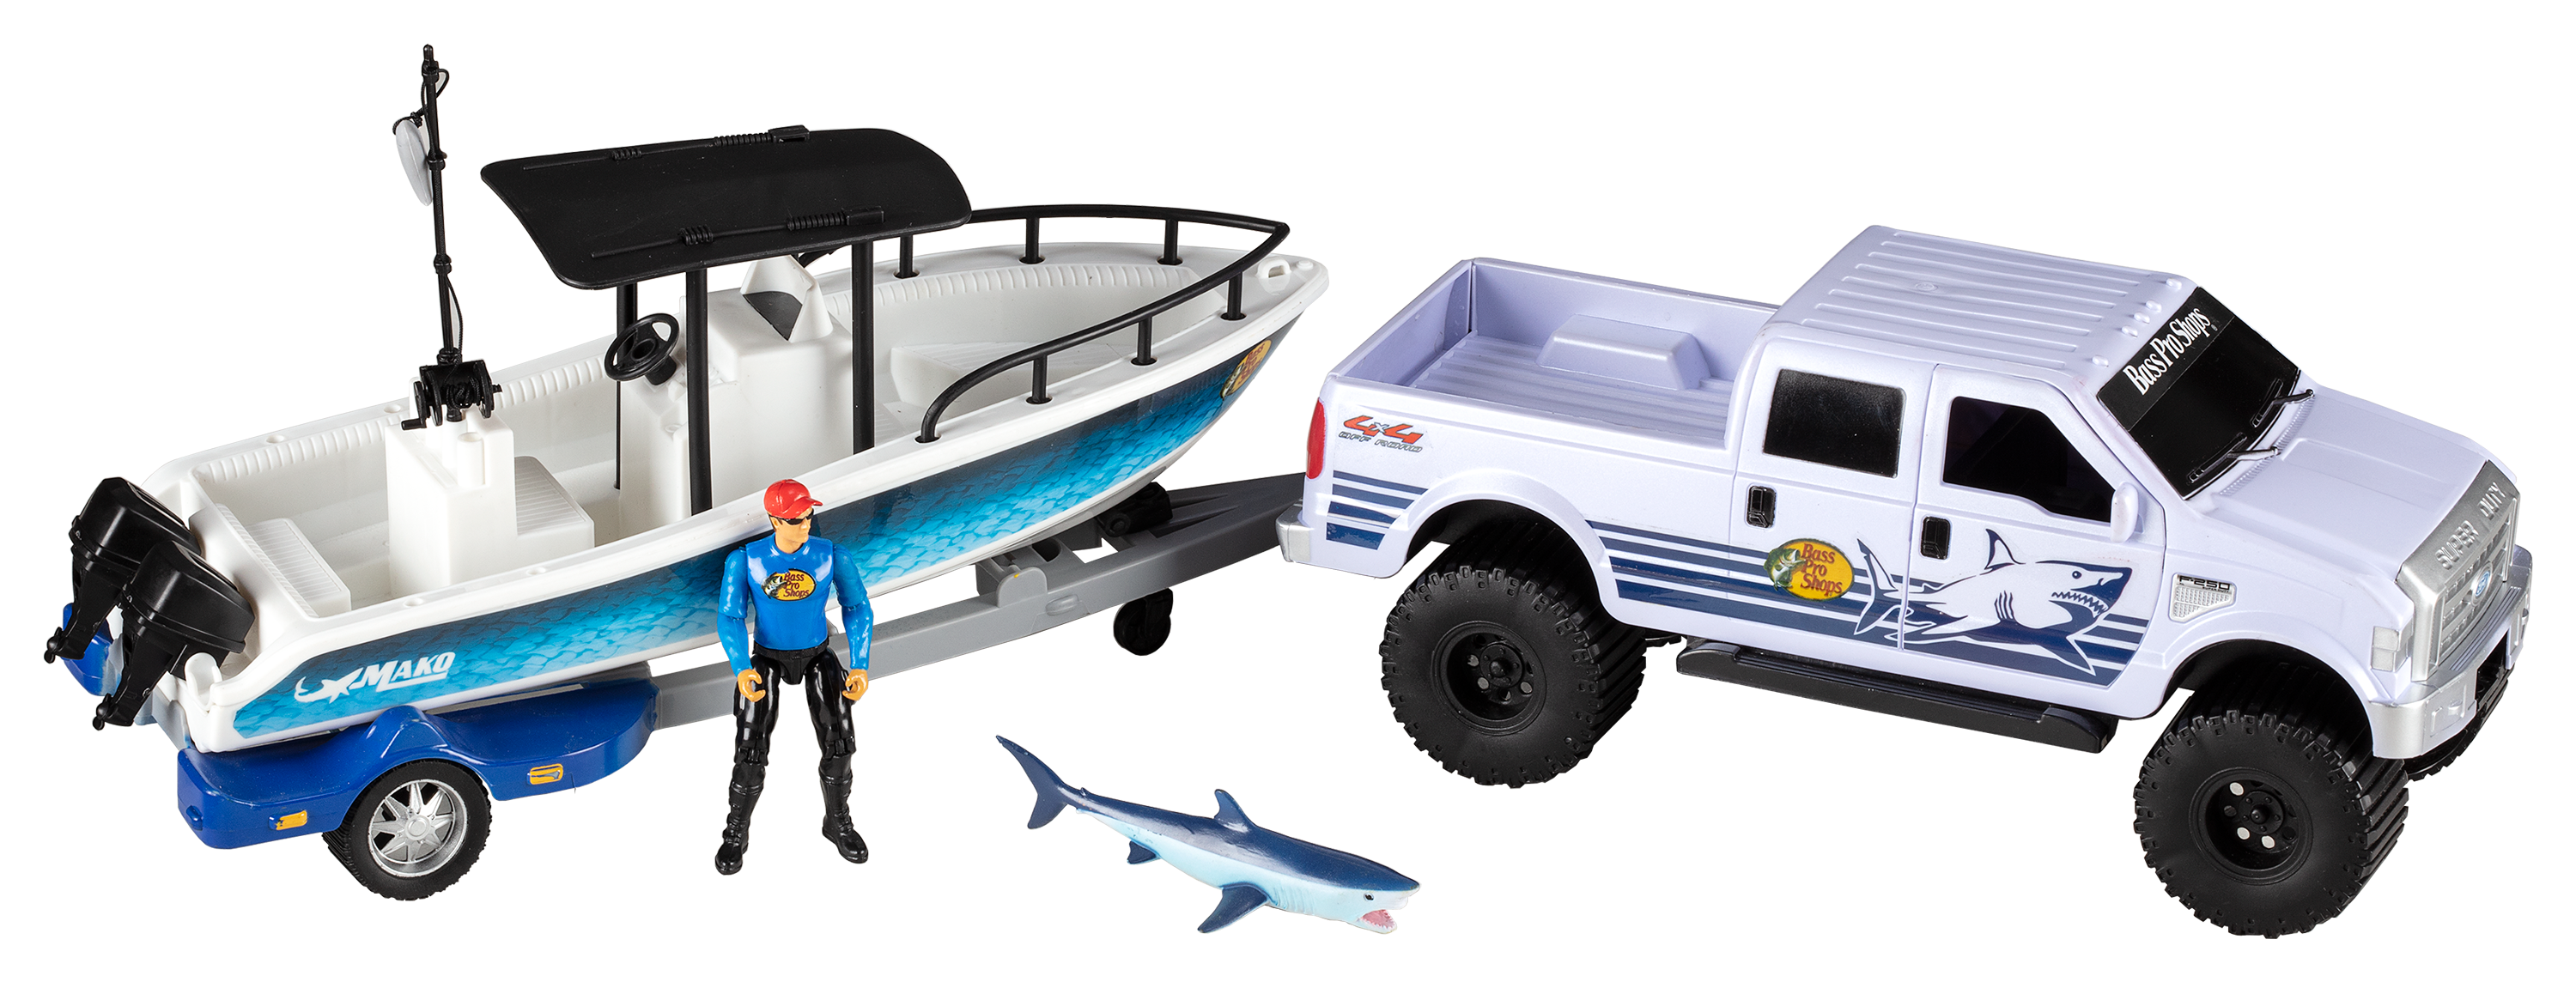 Ford Super Duty Ride On Toy for Kids - Buy Online